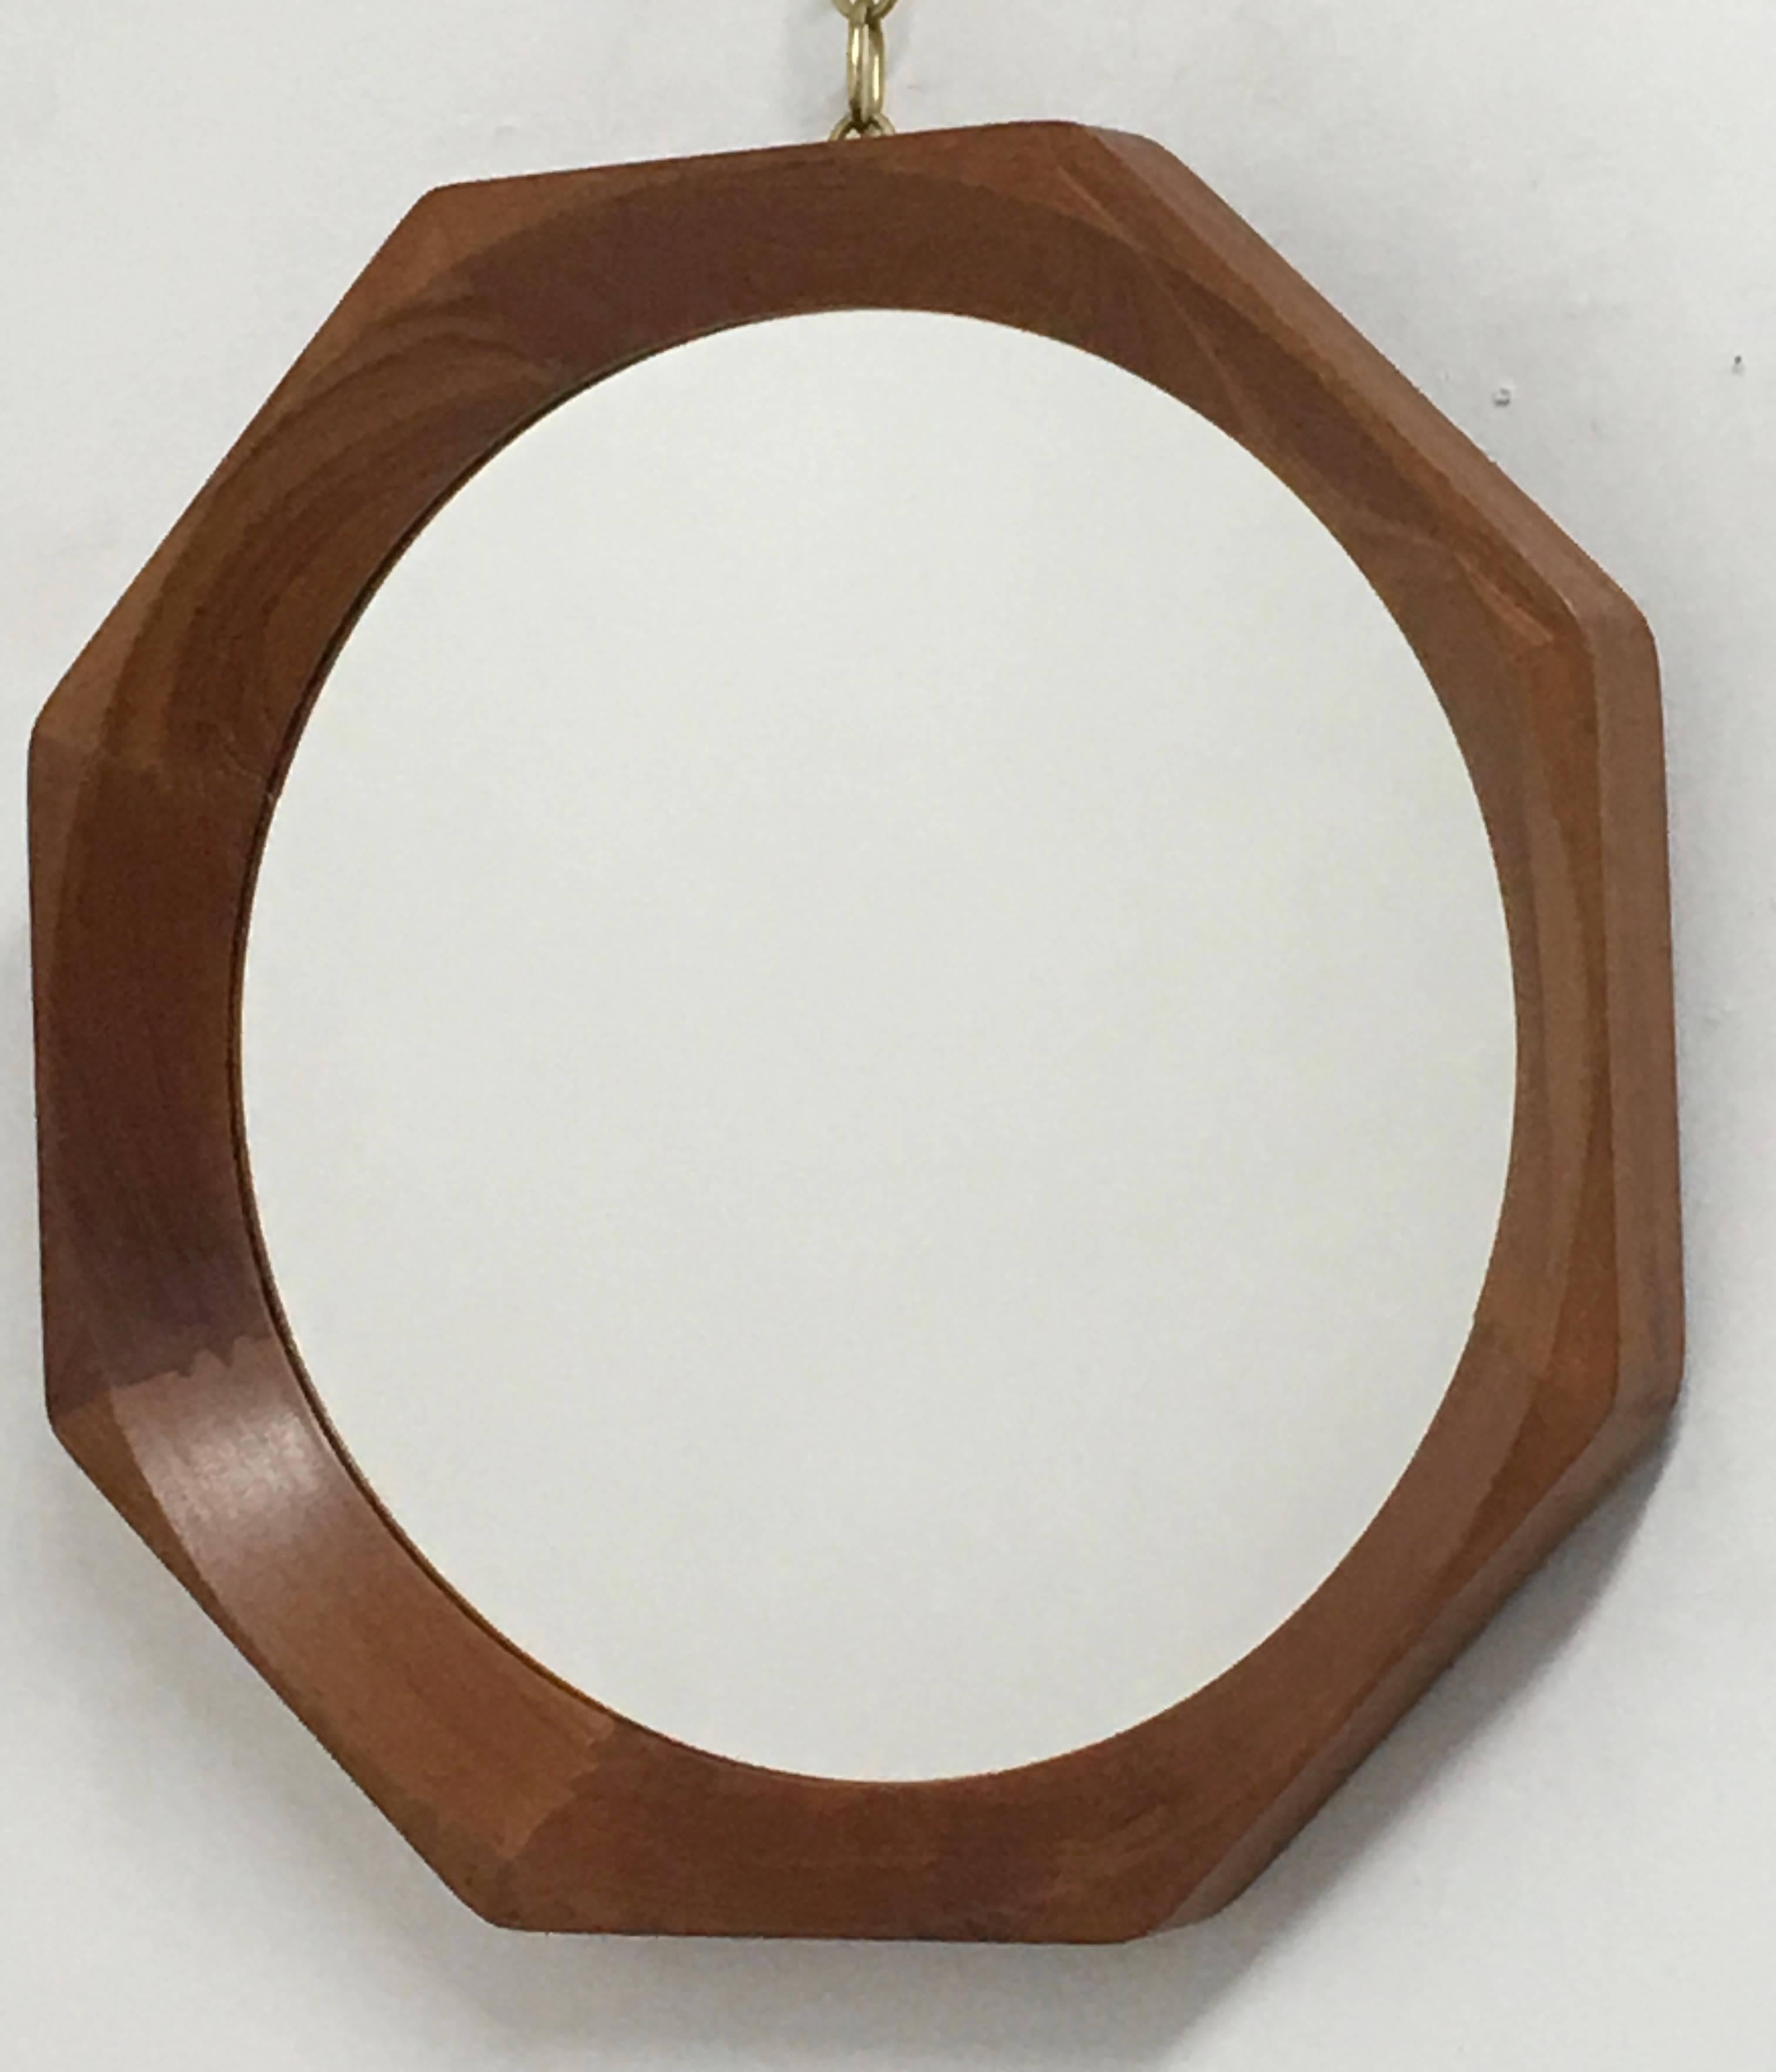 Octagonal Danish mirror constructed of beveled joined pieces of walnut. Sturdy mirror with a simple and elegant design. Back is marked 